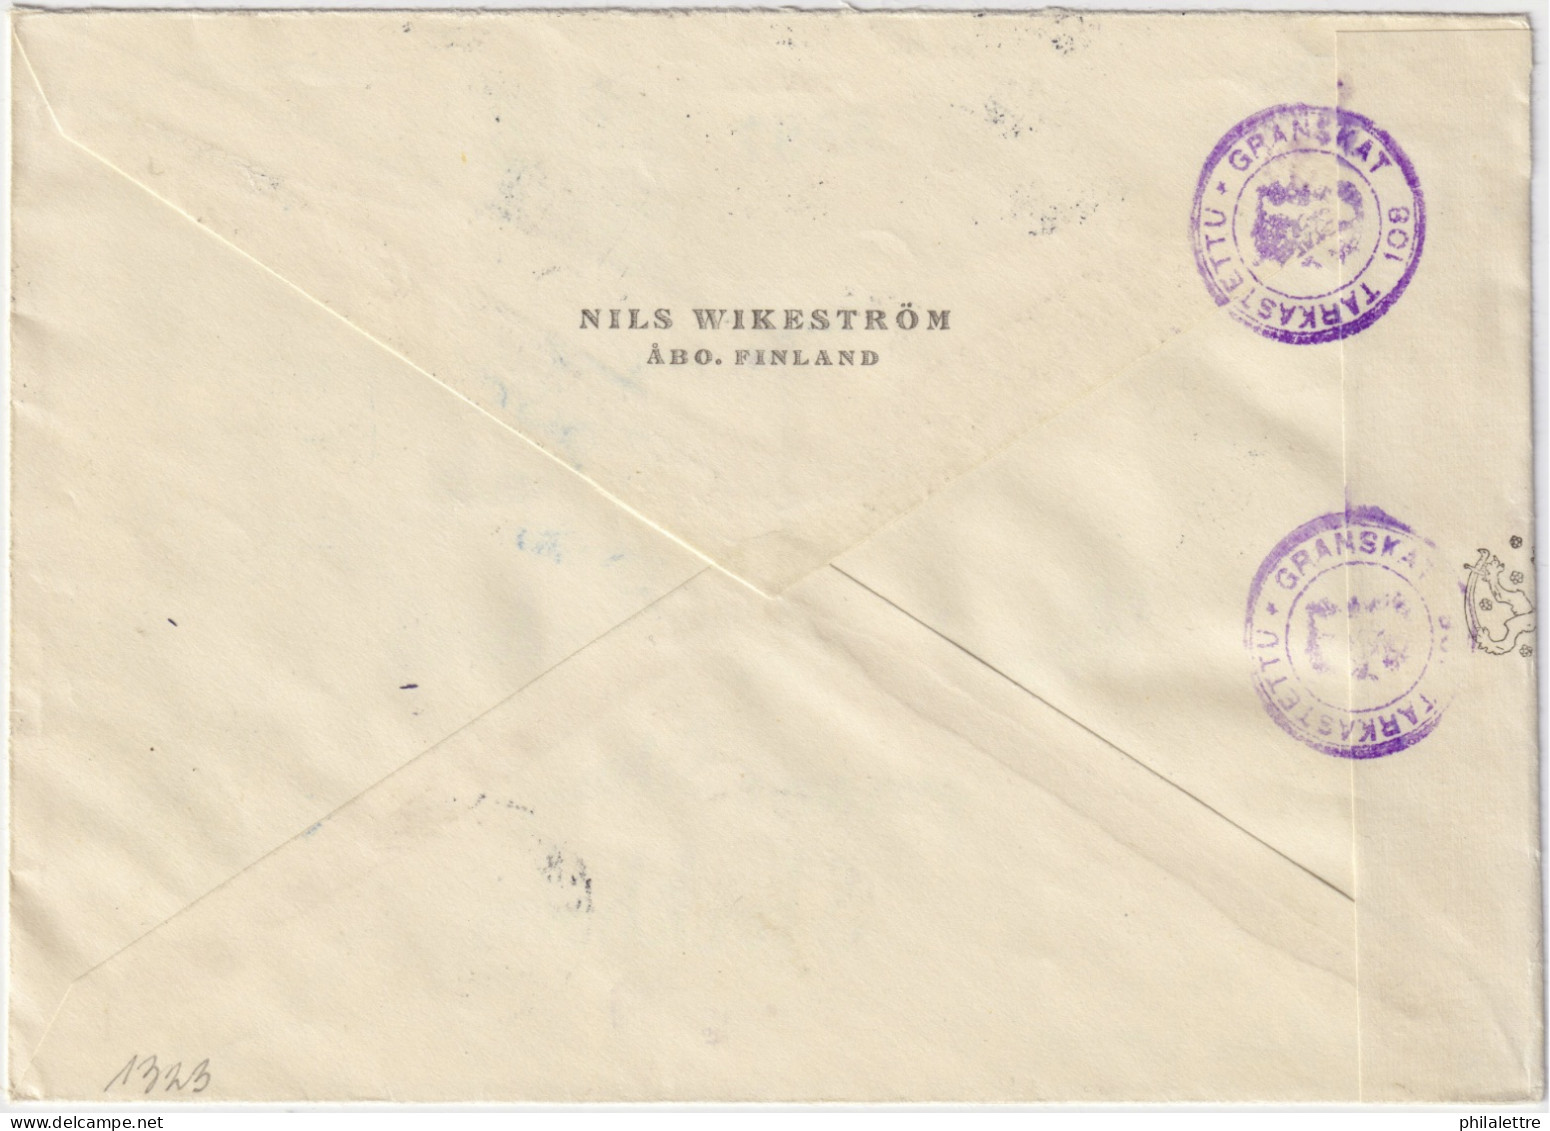 FINLAND - 1945 - Facit F290/4 Sports Set On Registered First Day Cover (April 16 "TURKU / ABO") To Stockholm - Censored - FDC